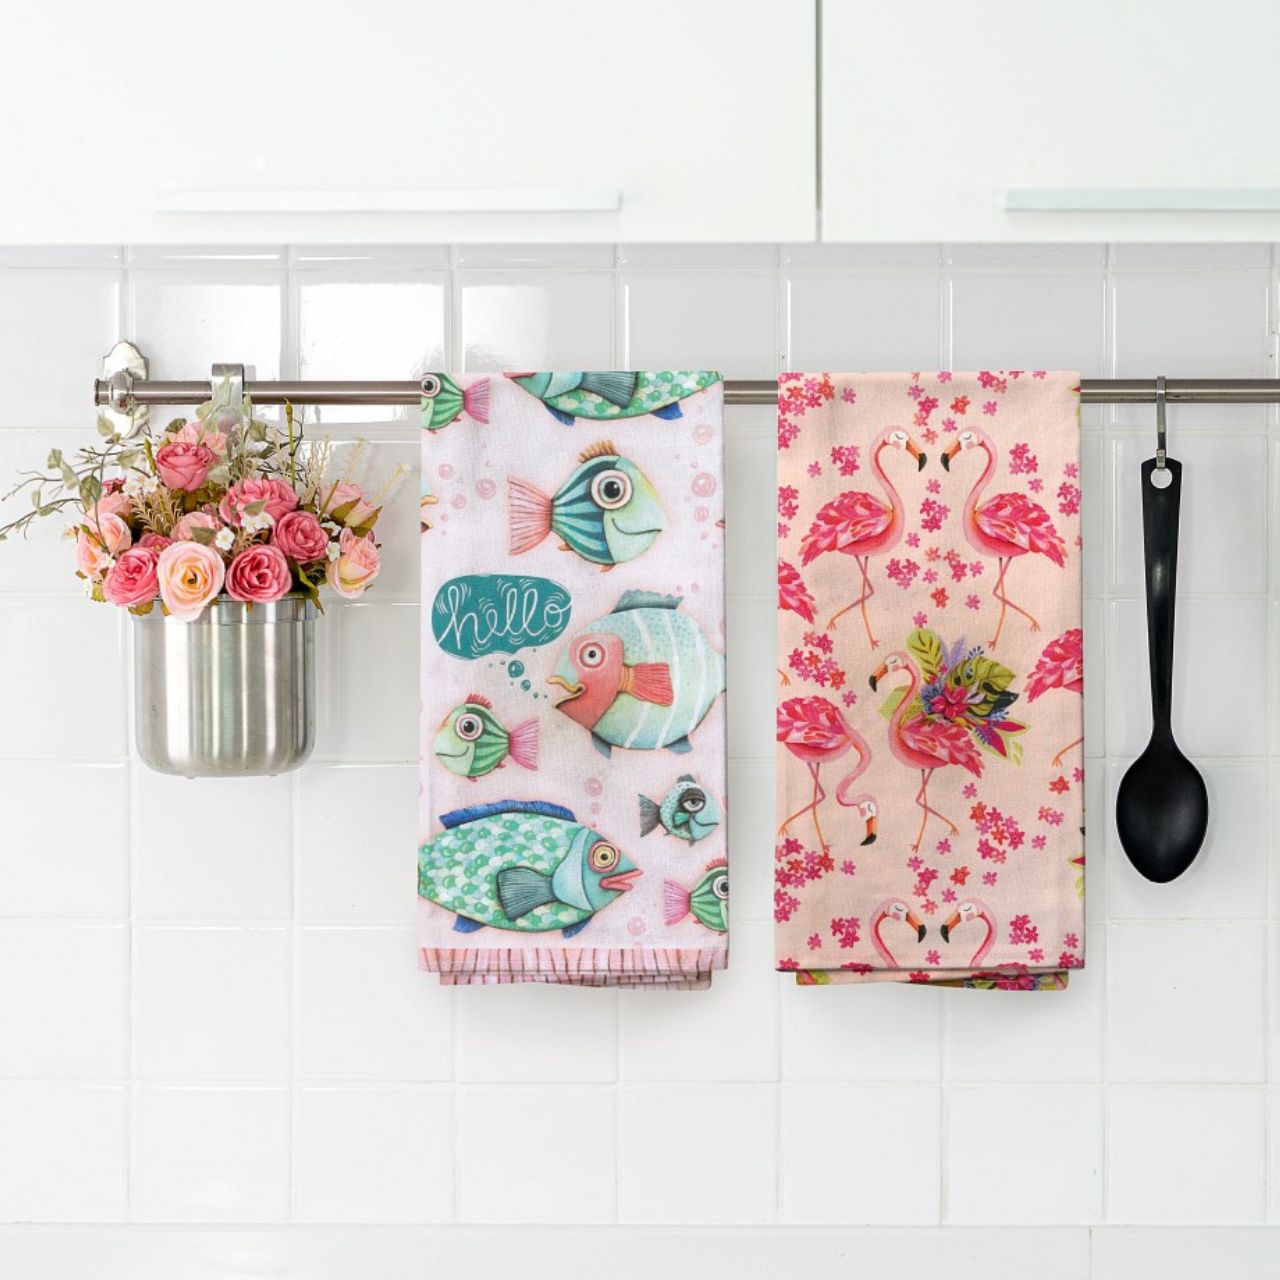 Michelle Allen Pink Flamingos Tea Towel  Our Pink Flamingo 100% cotton tea towel add the perfect pop of colour and personality to any kitchen.